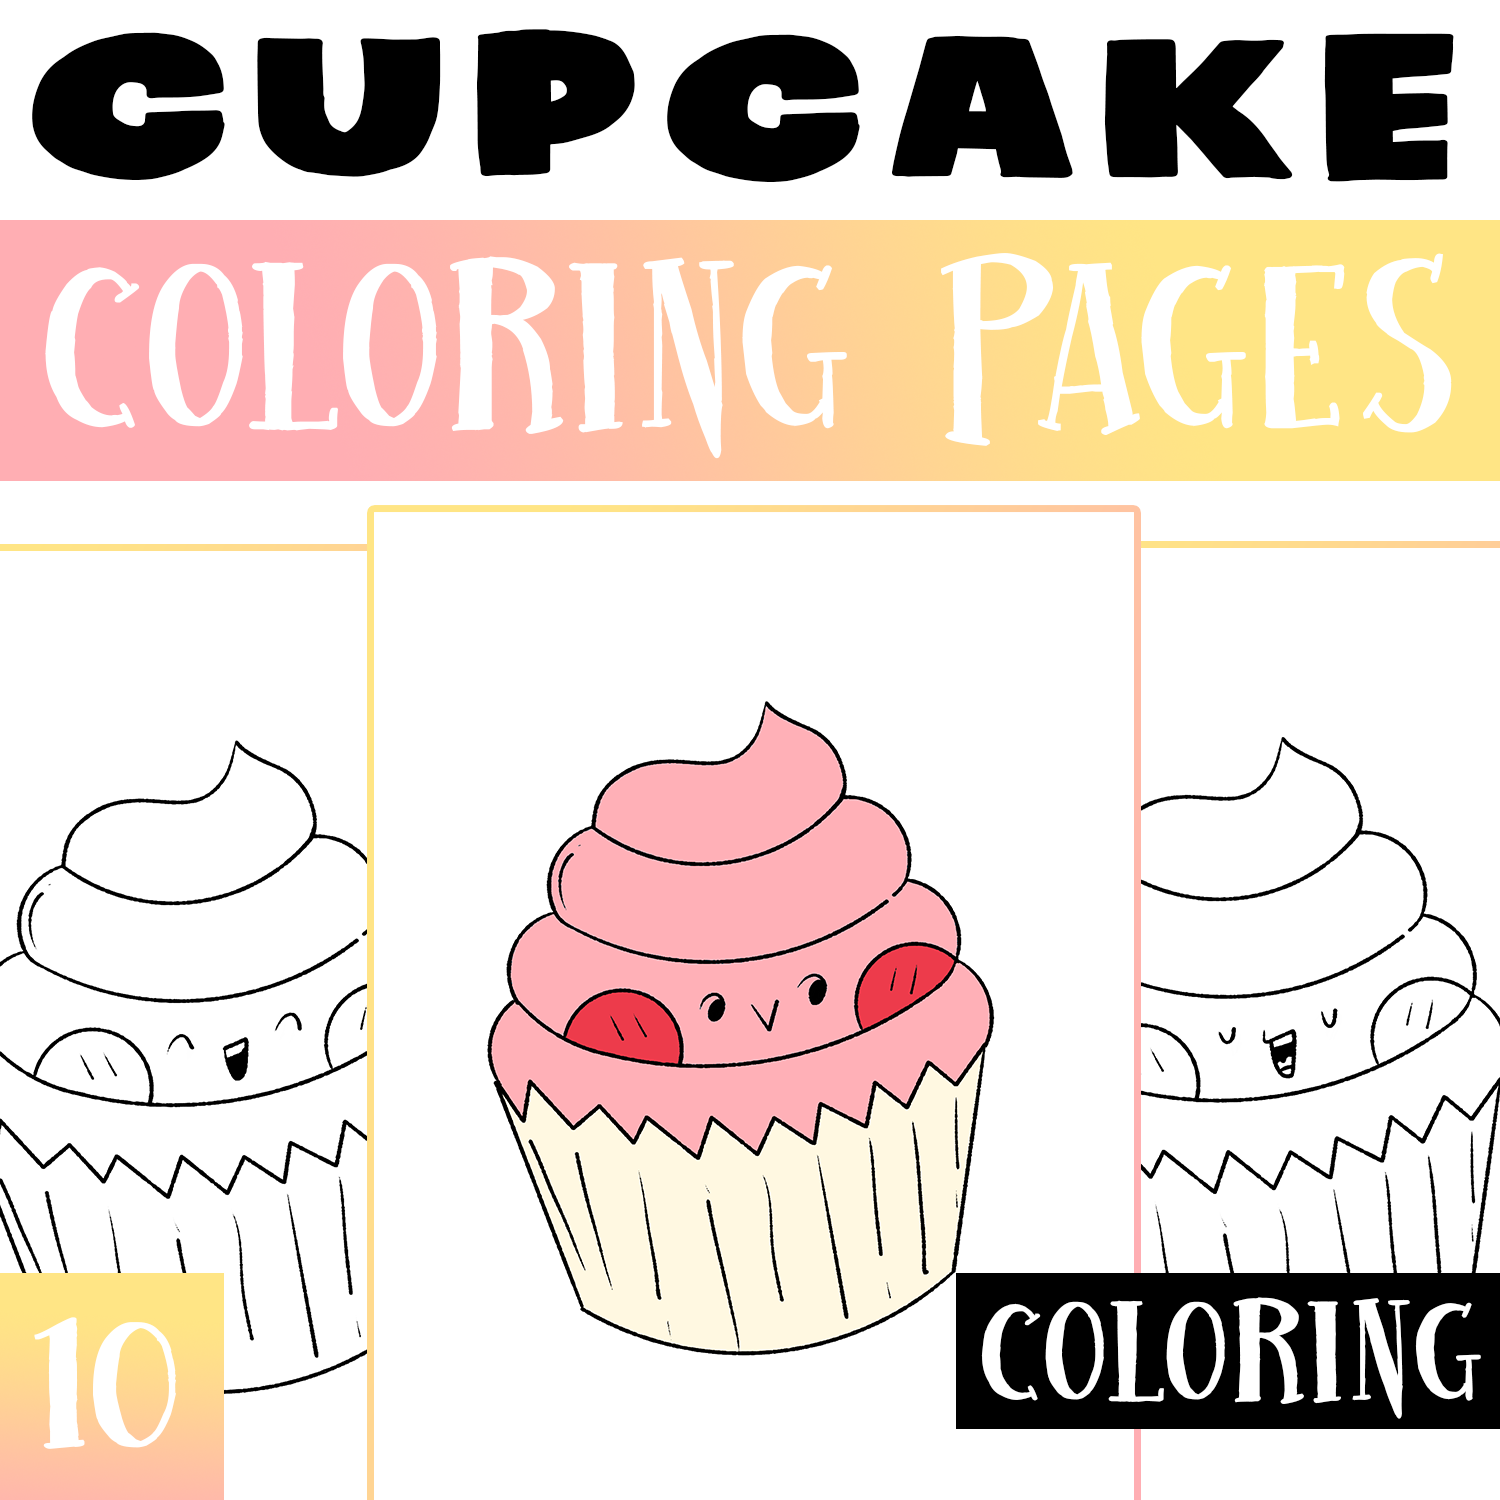 Cupcake coloring pages worksheet activities sweets dessert end of the year made by teachers